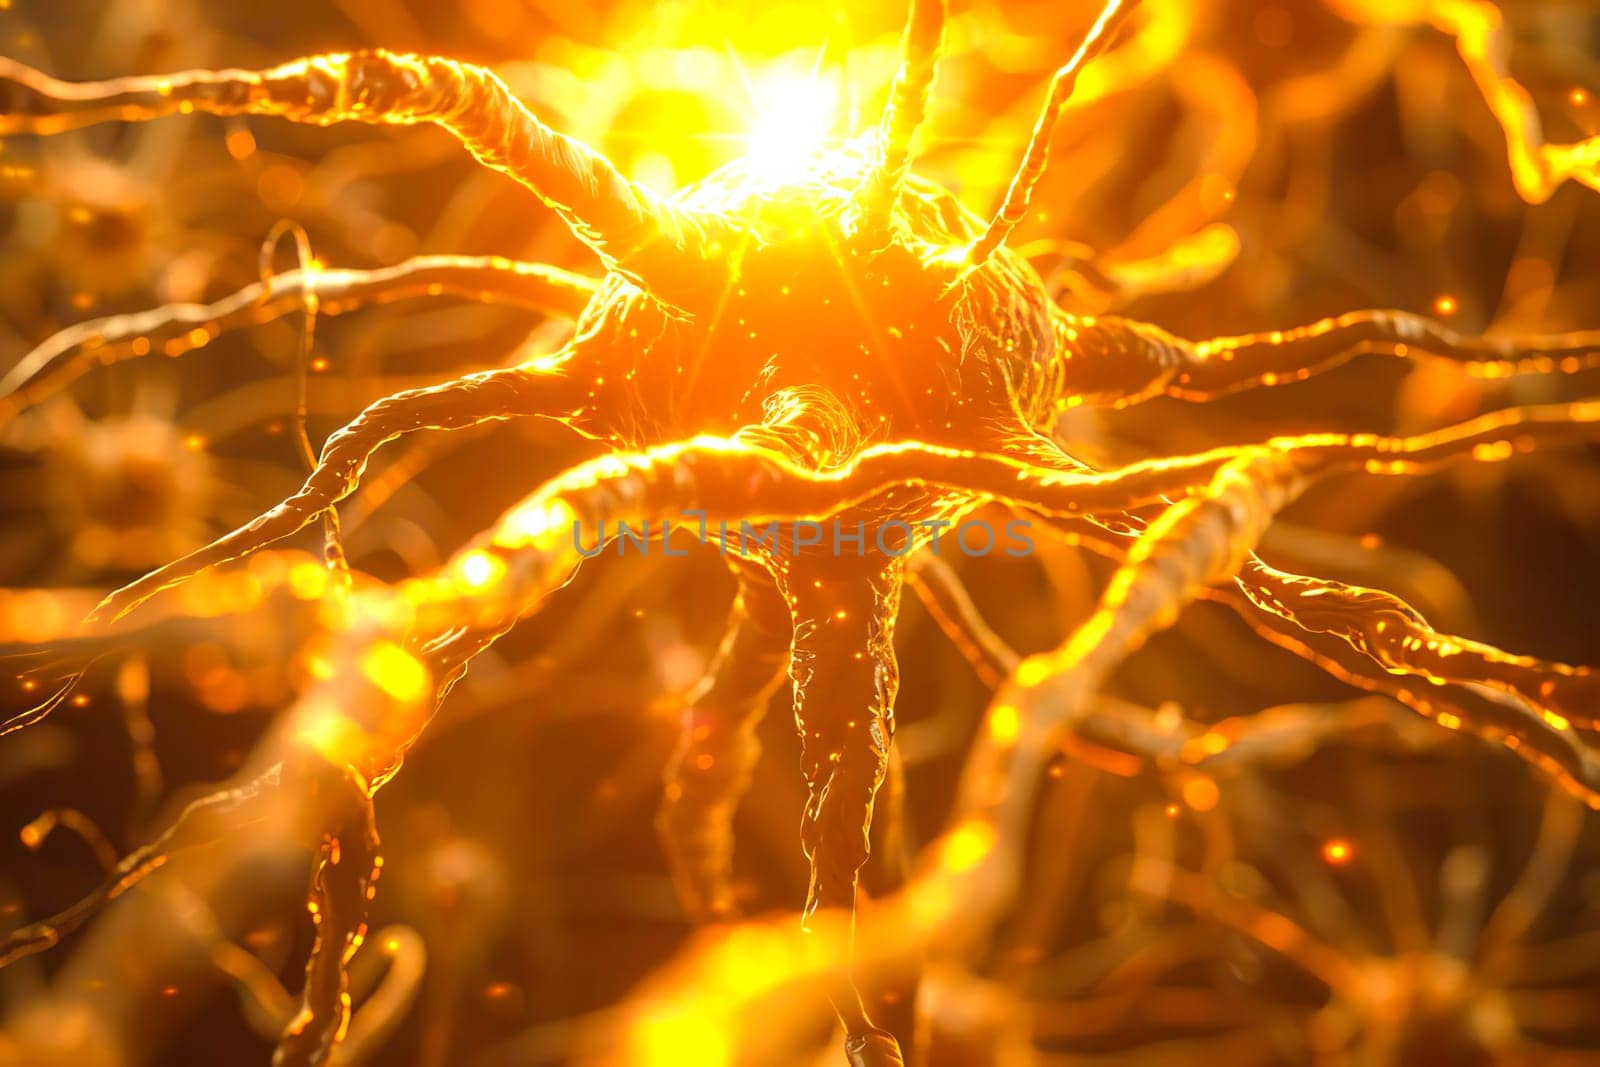 Neurons transmit signals with a bright flash in the brains neural network.